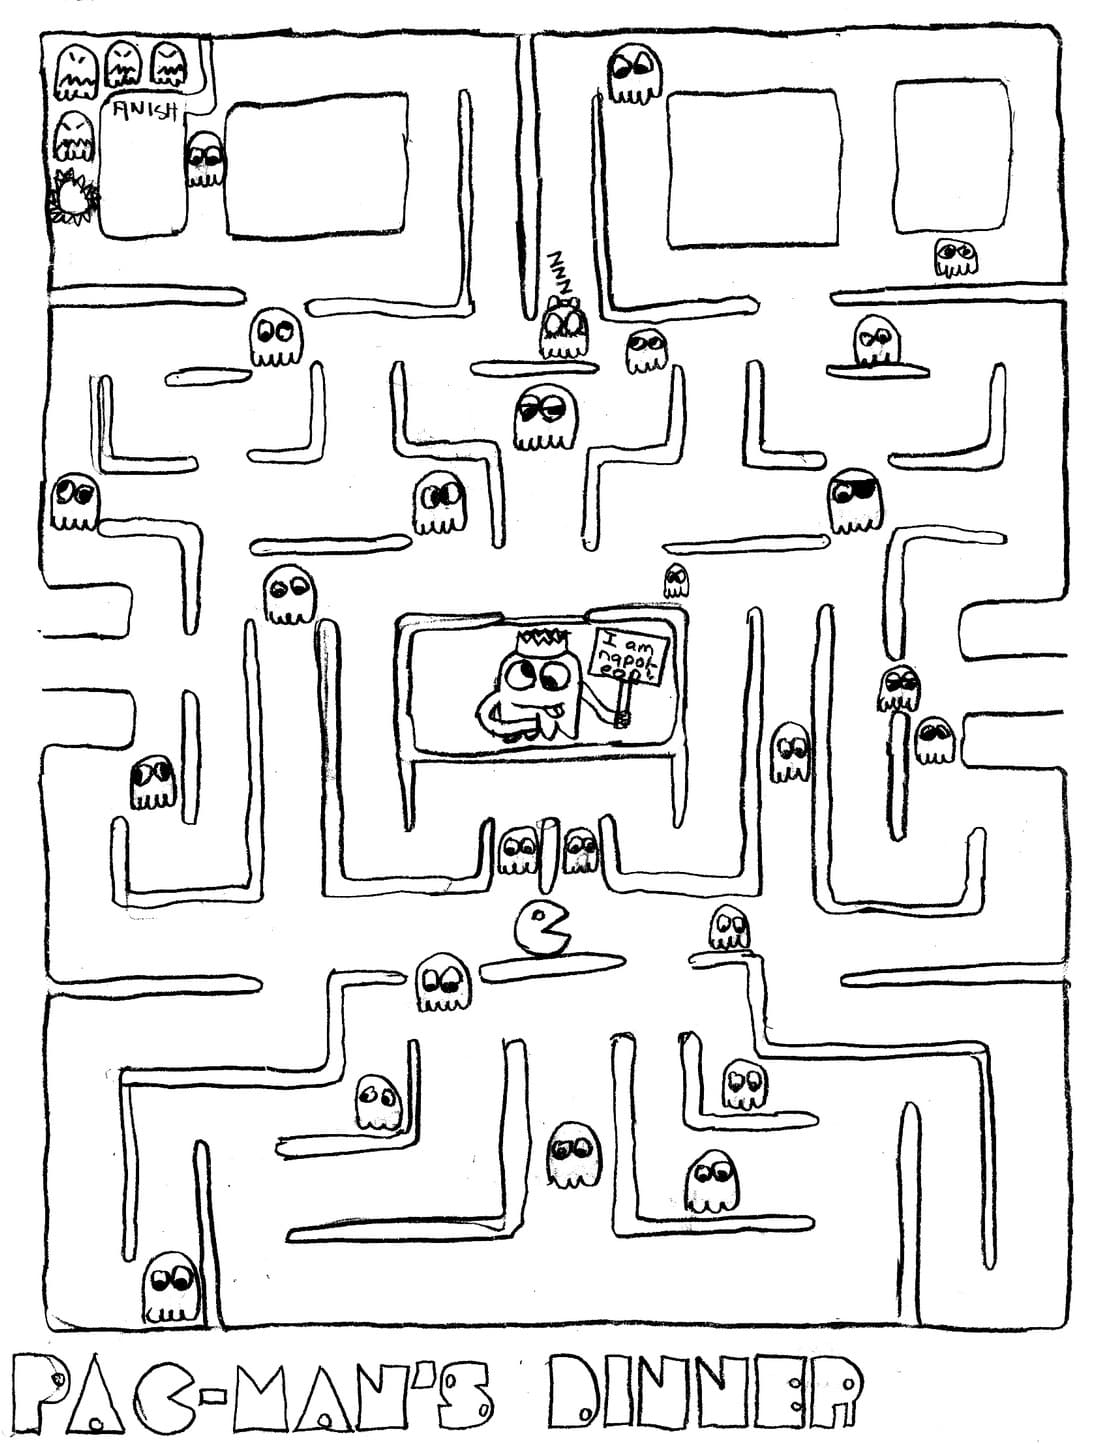 Pacman Find Road Coloring Page